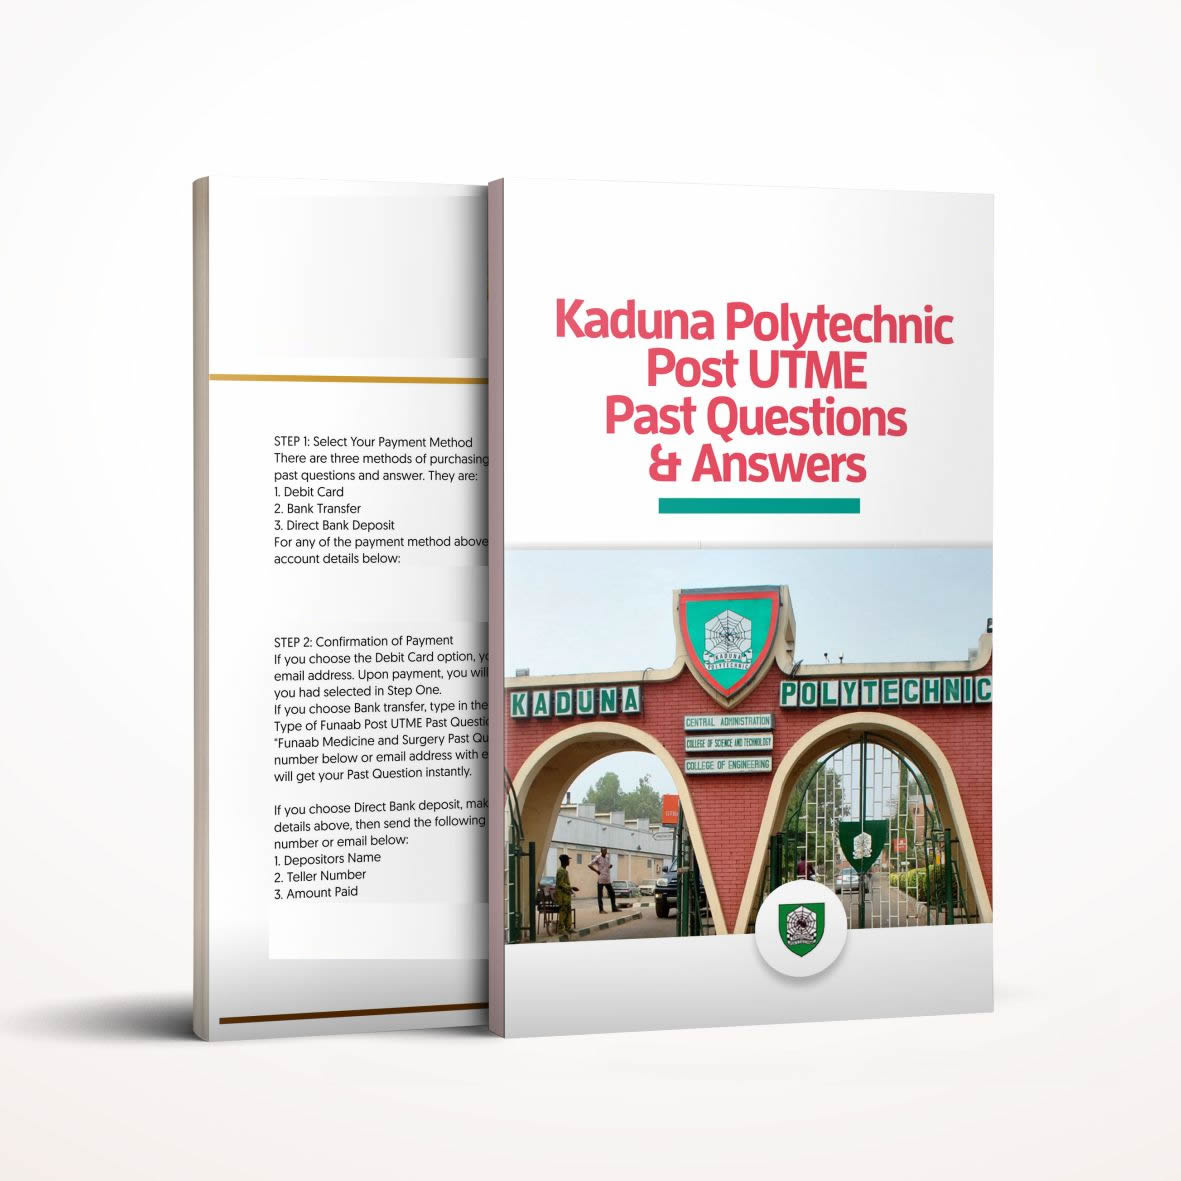 KADUNA POLY Post UTME past questions and answers